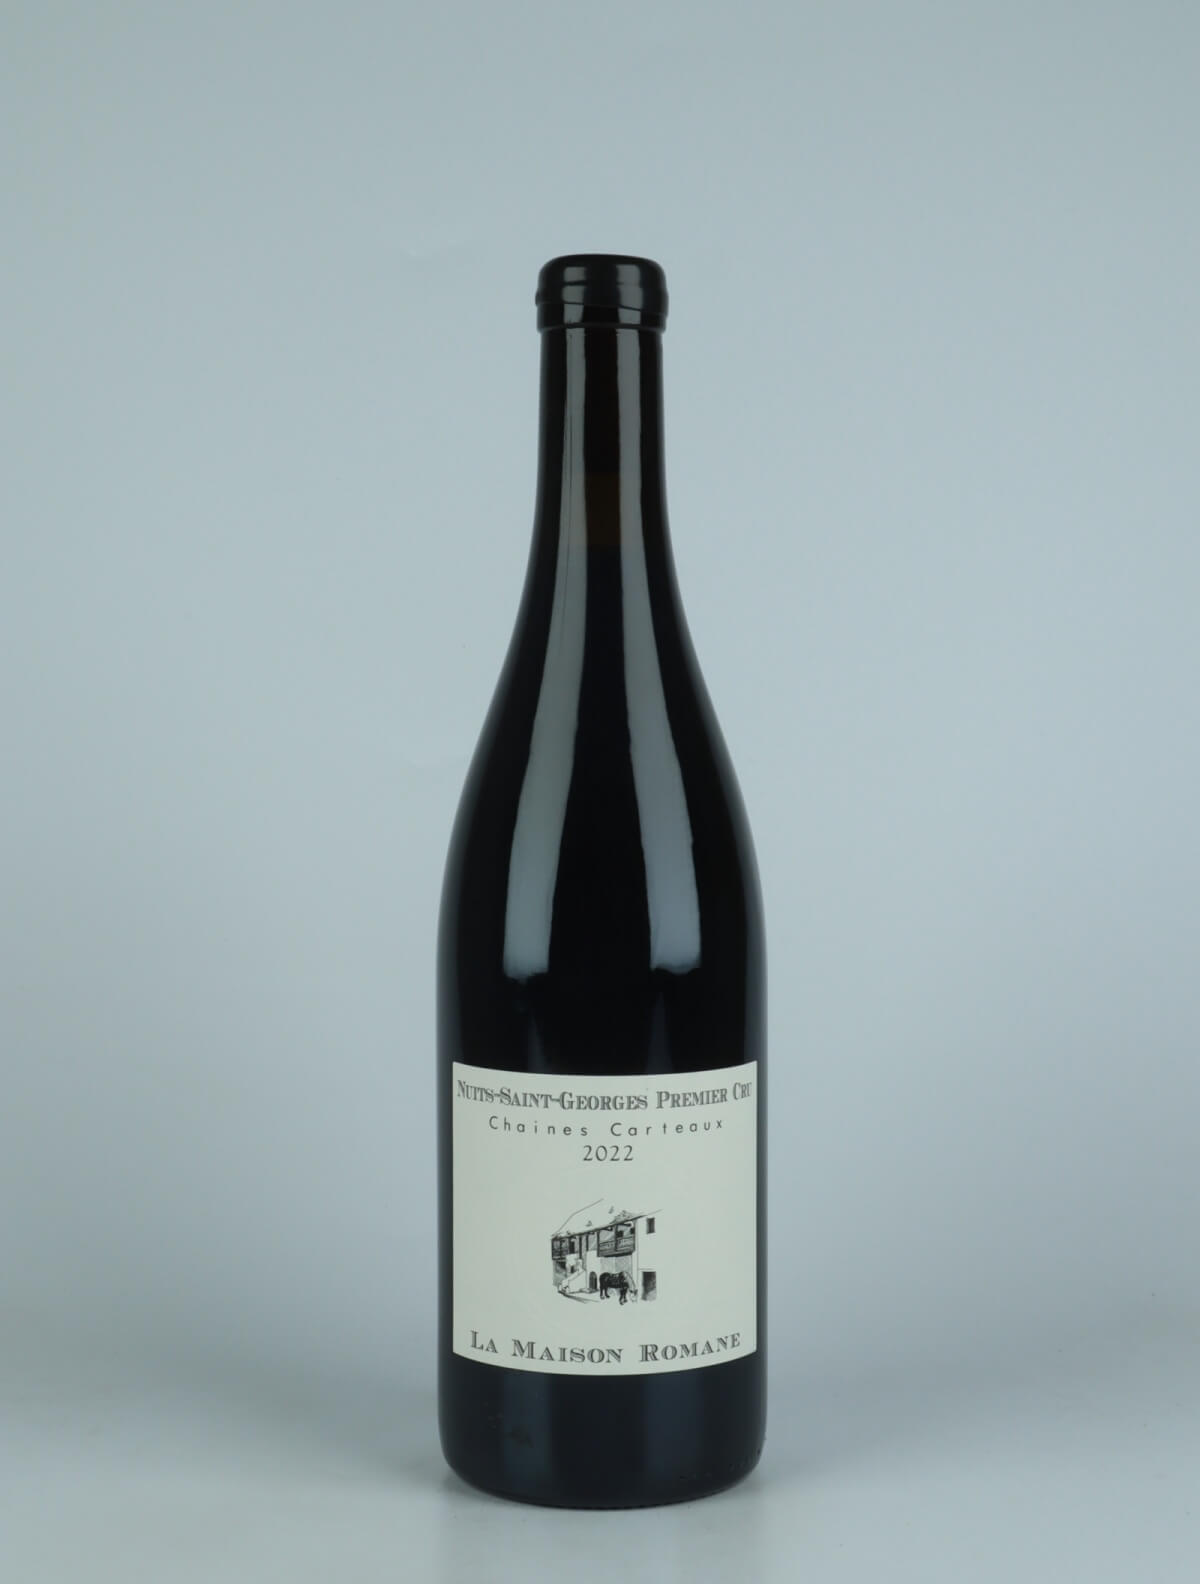 A bottle 2022 Nuits Saint Georges 1. Cru - Chaines Carteaux Red wine from La Maison Romane, Burgundy in France